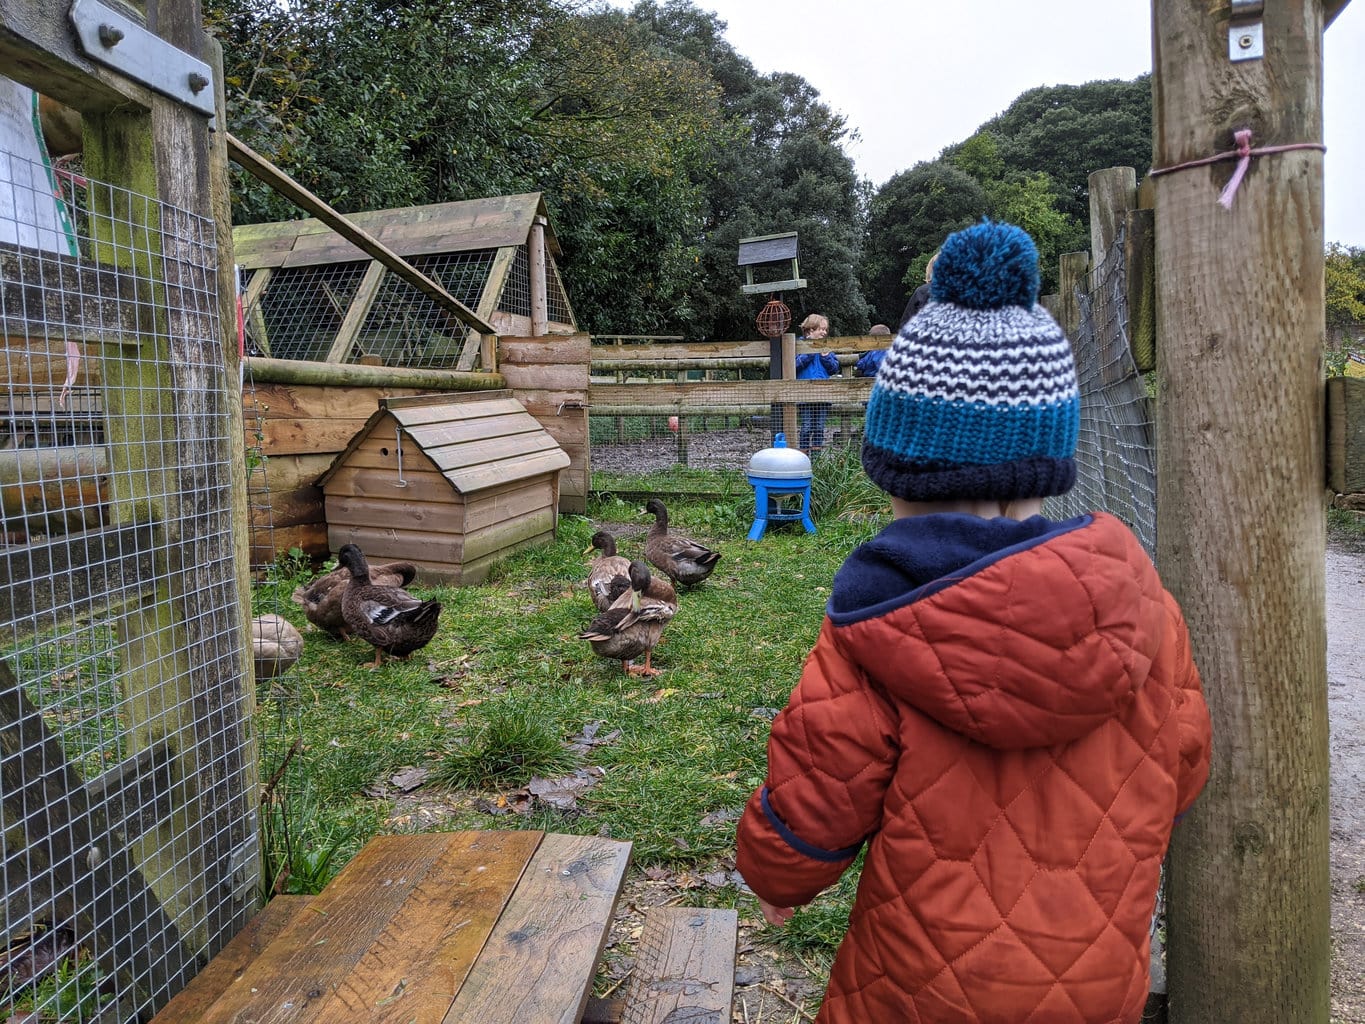 toddler in a blue wooly hat with a pompom and tick orange onesey with a hood looking at a grassy enclosure with several ducks and a small wooden hut